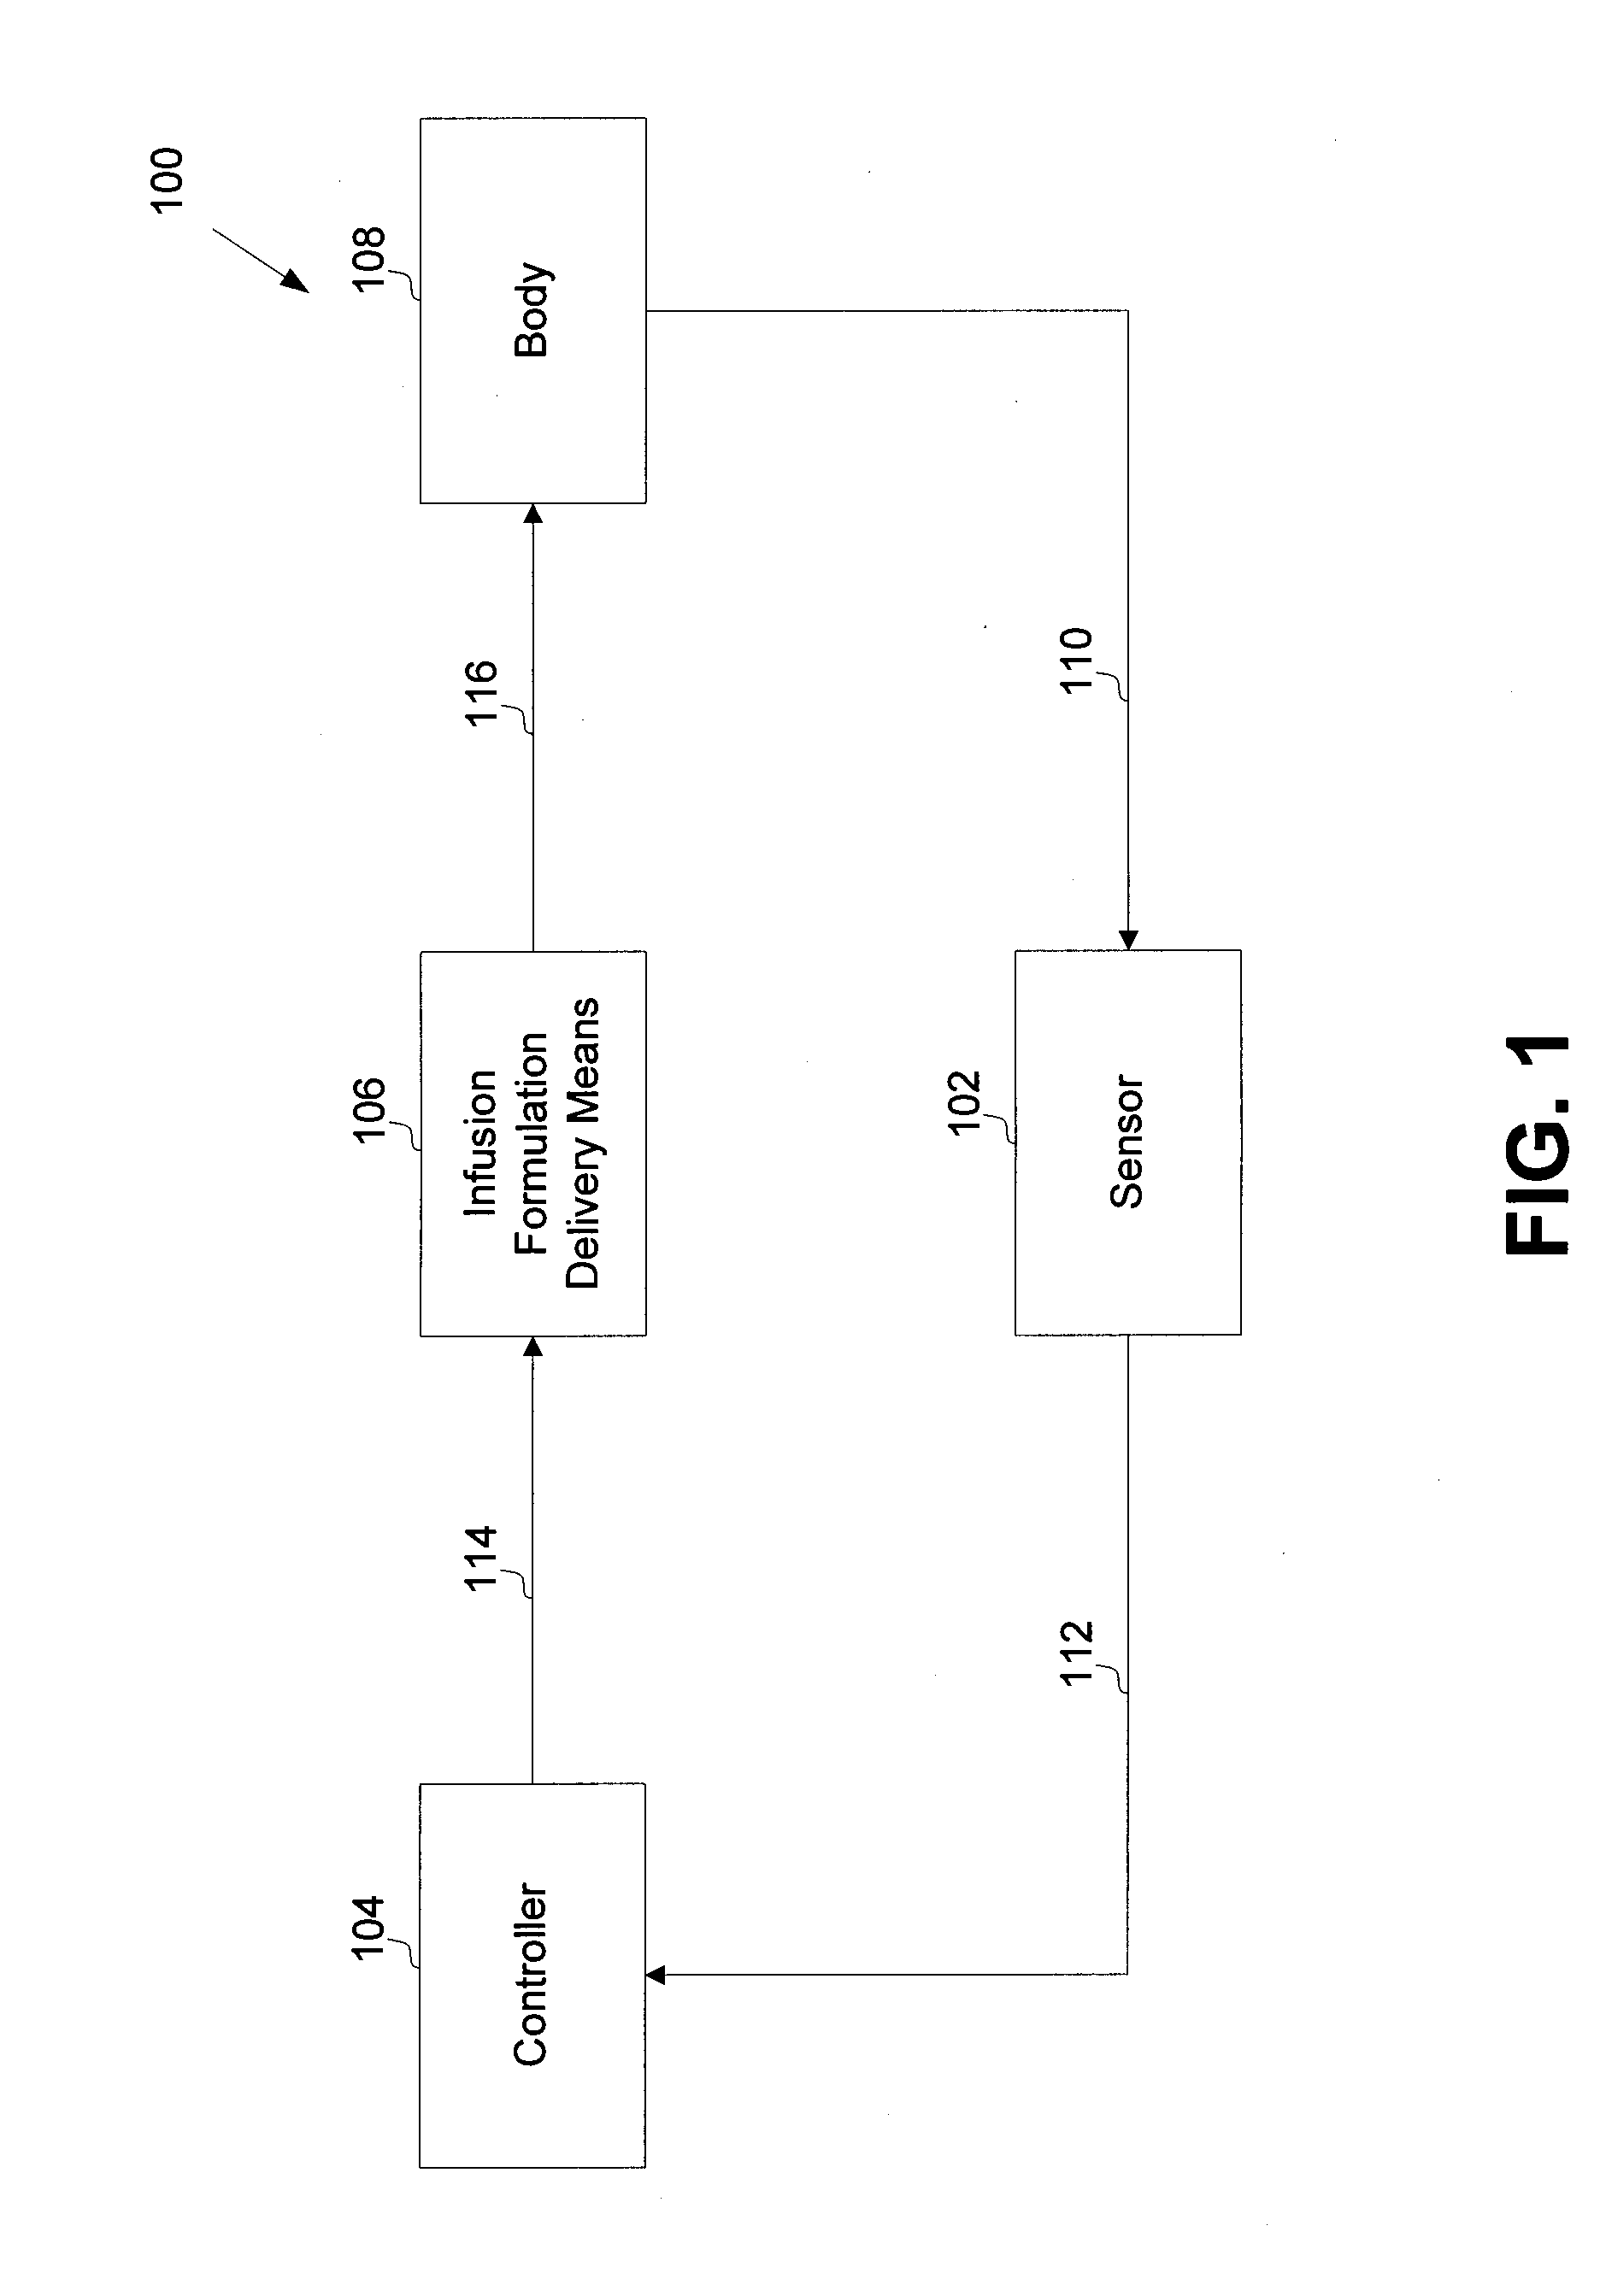 System and method for providing closed loop infusion formulation delivery